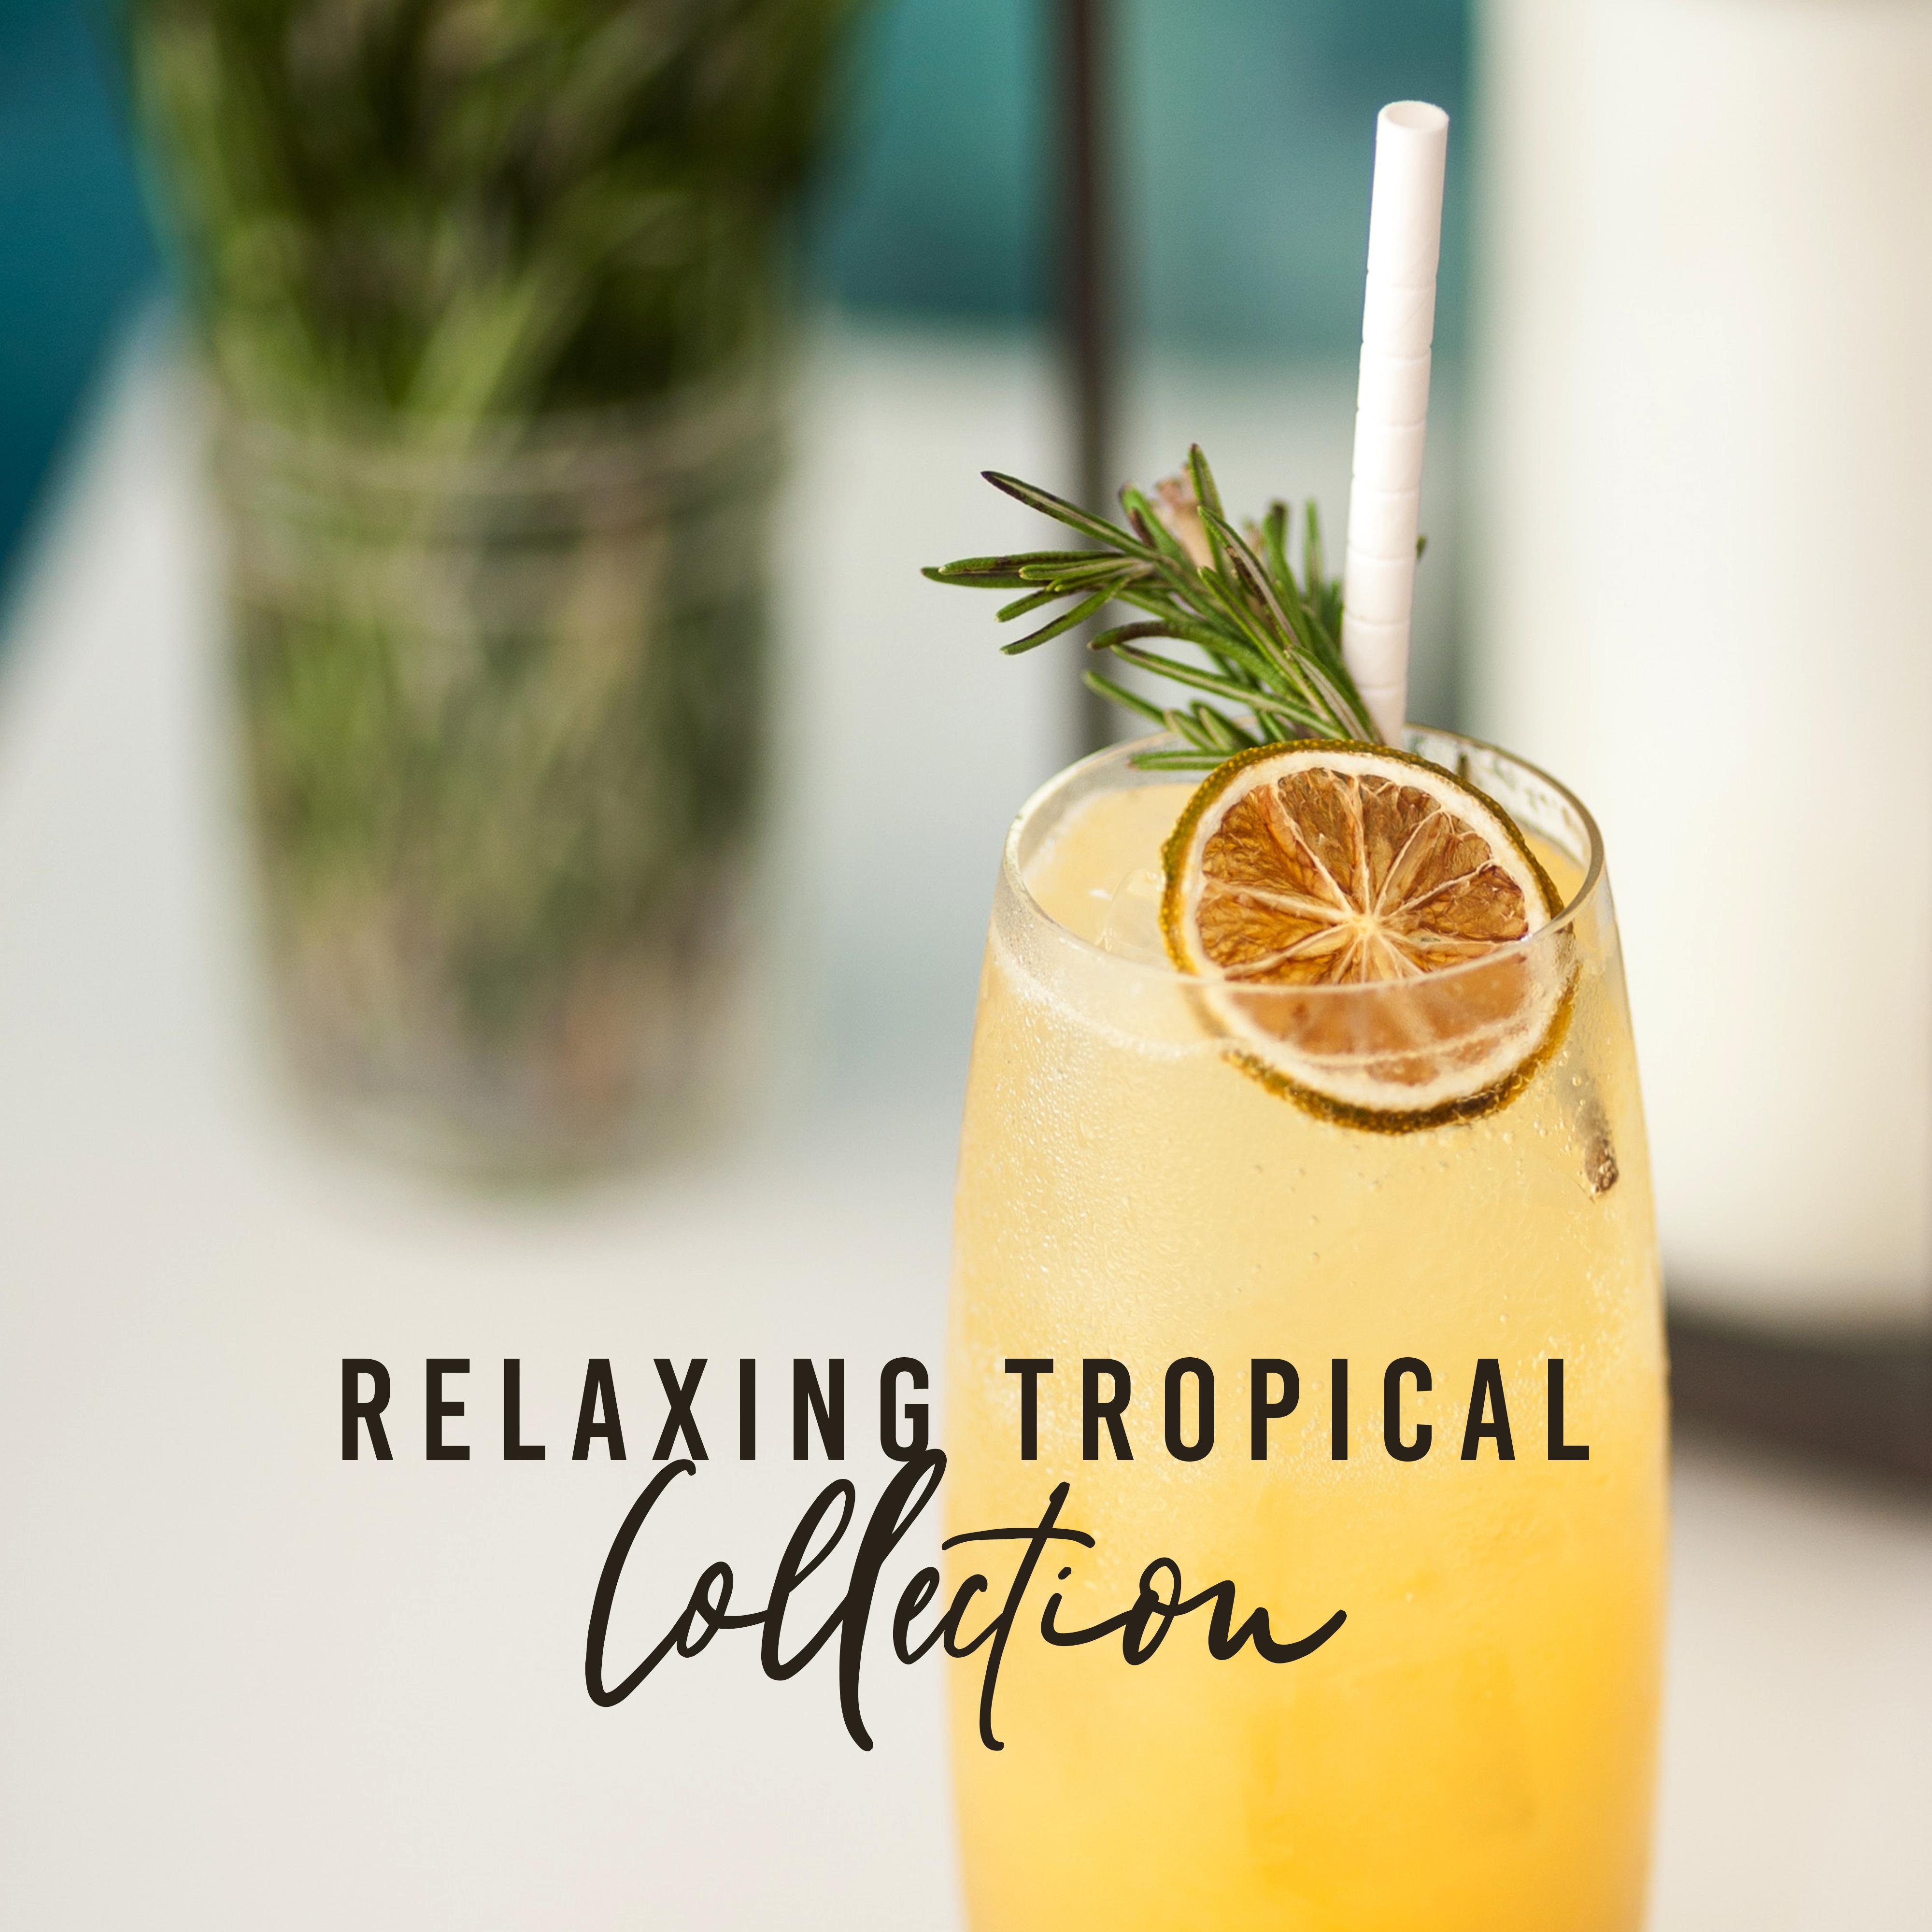 Relaxing Tropical Collection – Ibiza Chill Out, Chillout Bar Lounge, Relax, Chill Out 2019, Summertime, Inner Bliss, Sunny Chillout Lounge